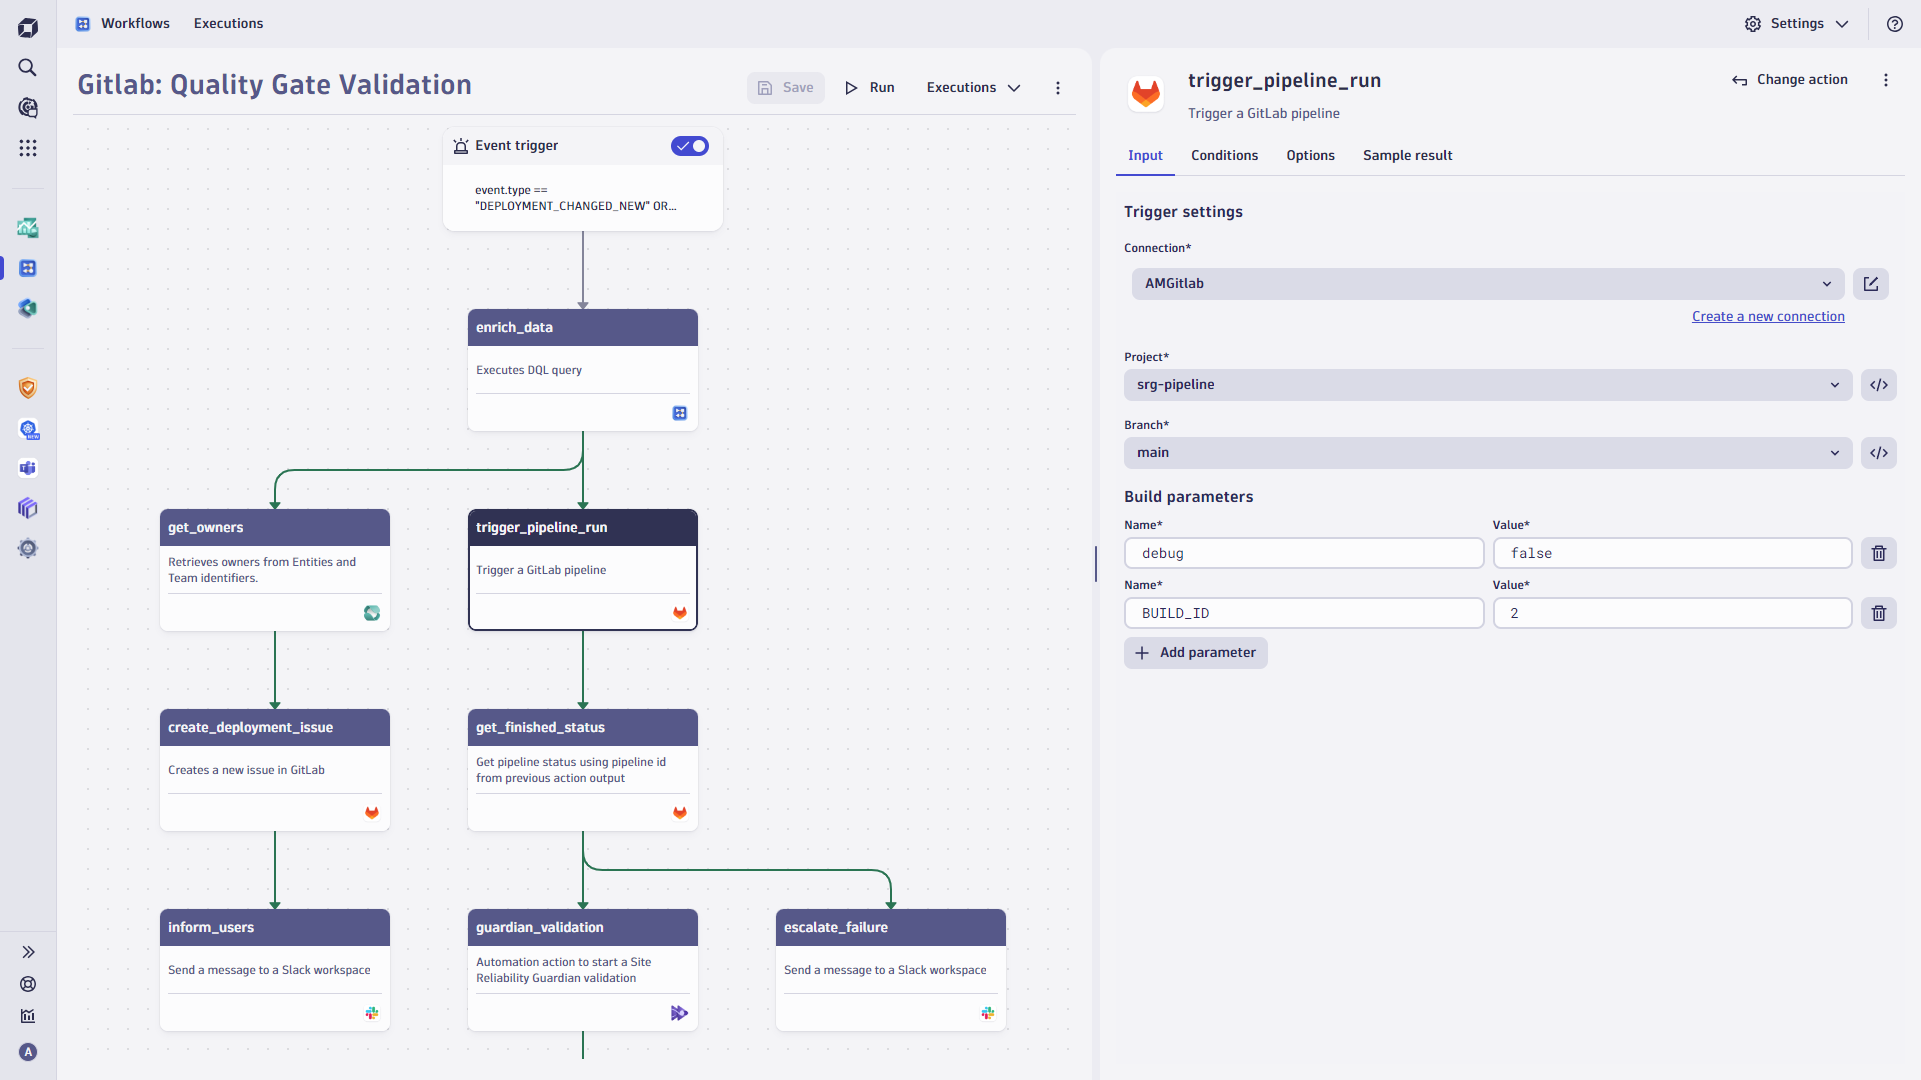 - Trigger pipeline runs in a GitLab by defining project, branch, and build parameters 
- Create or update issues in GitLab
- Query status of pipeline runs
- Combine GitLab workflow actions with notifications or quality gate validations